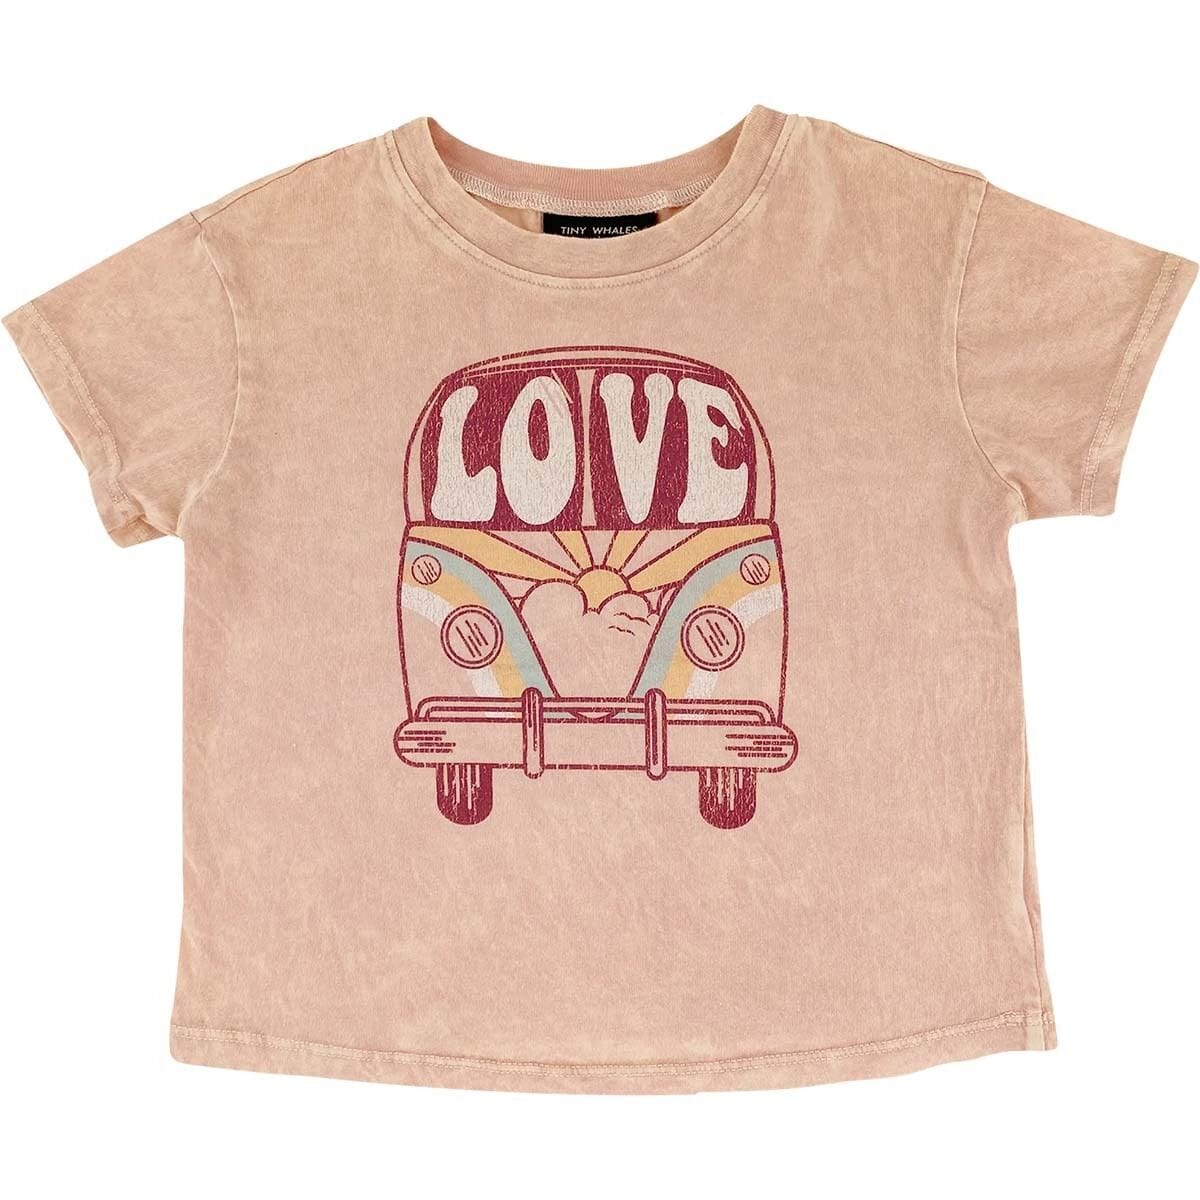 Tiny Whales Love Bus Boxy T-Shirt - Toddlers'